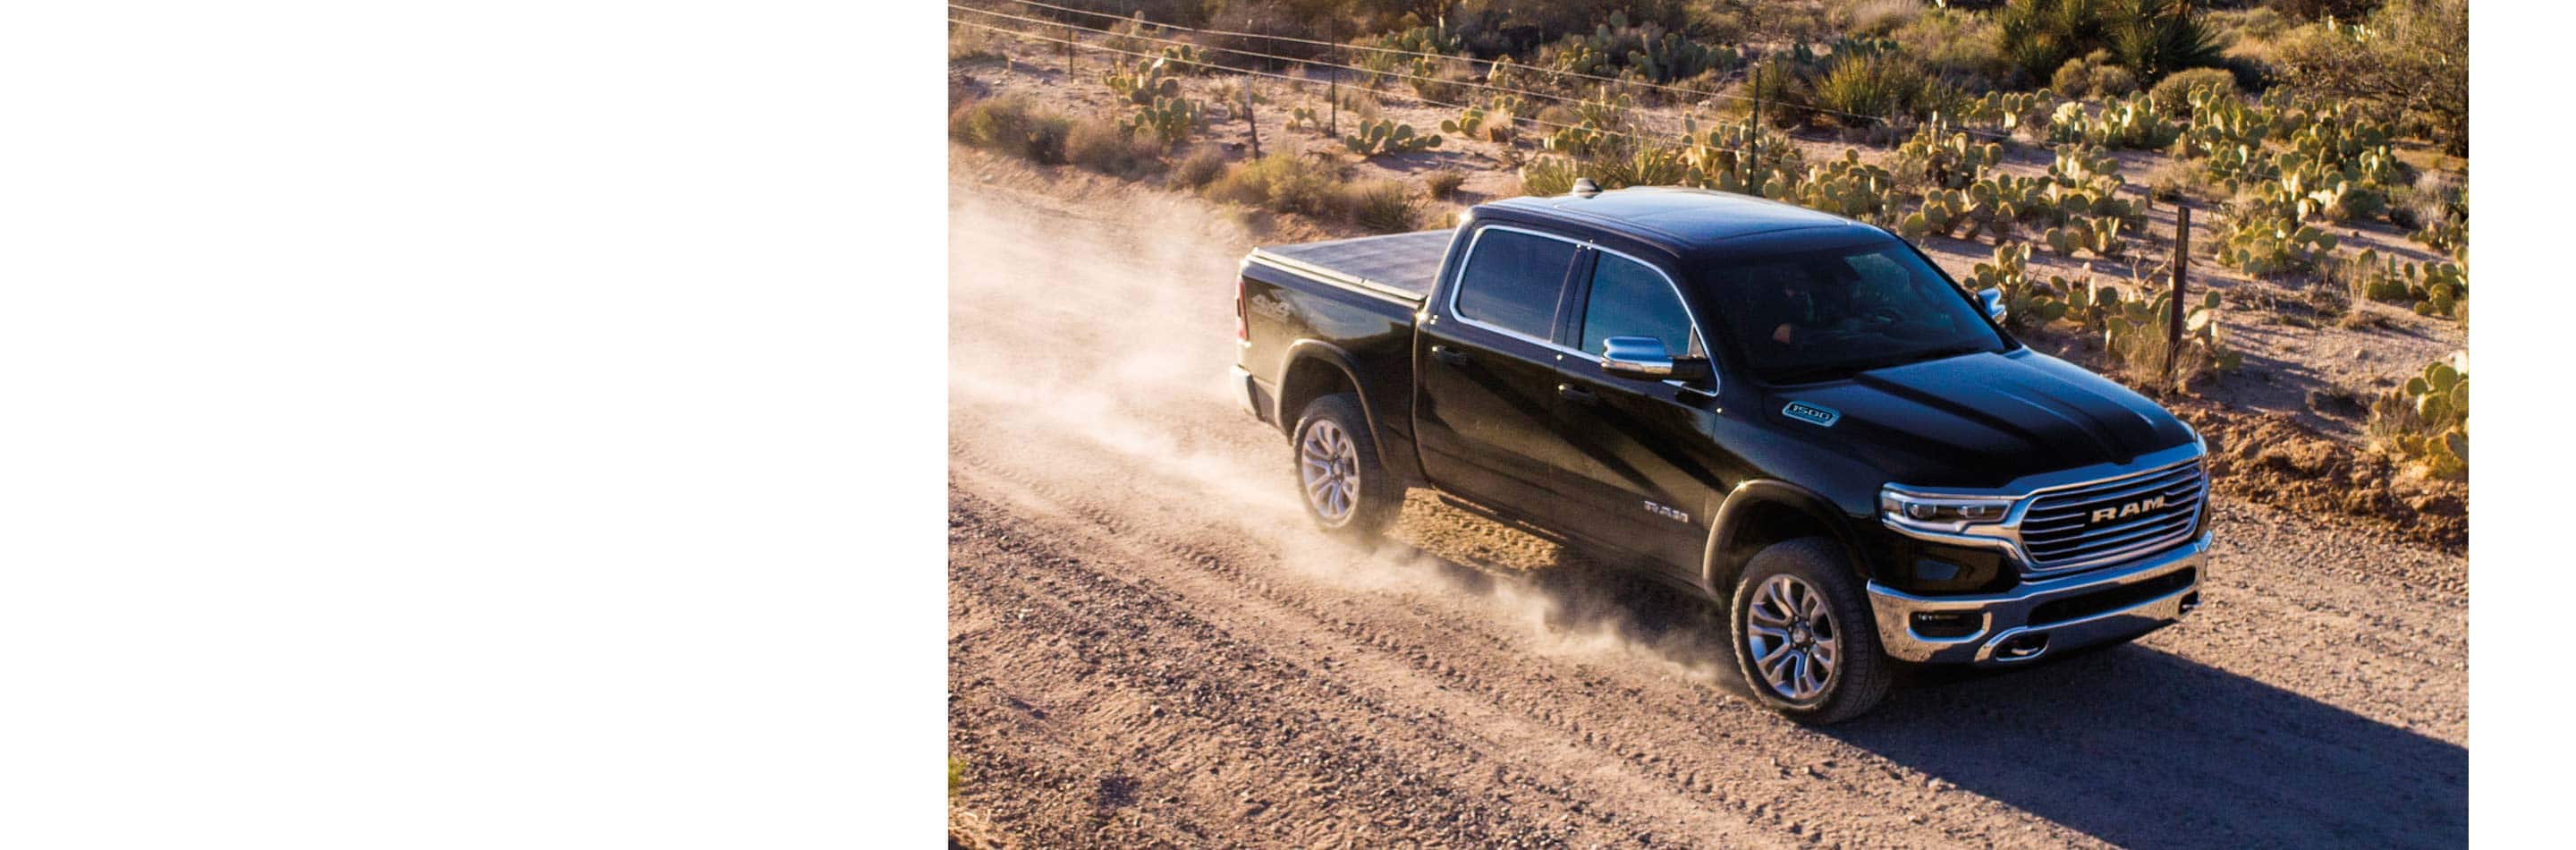 The 2023 Ram 1500 being driven on a dirt road past fenced-off crops.